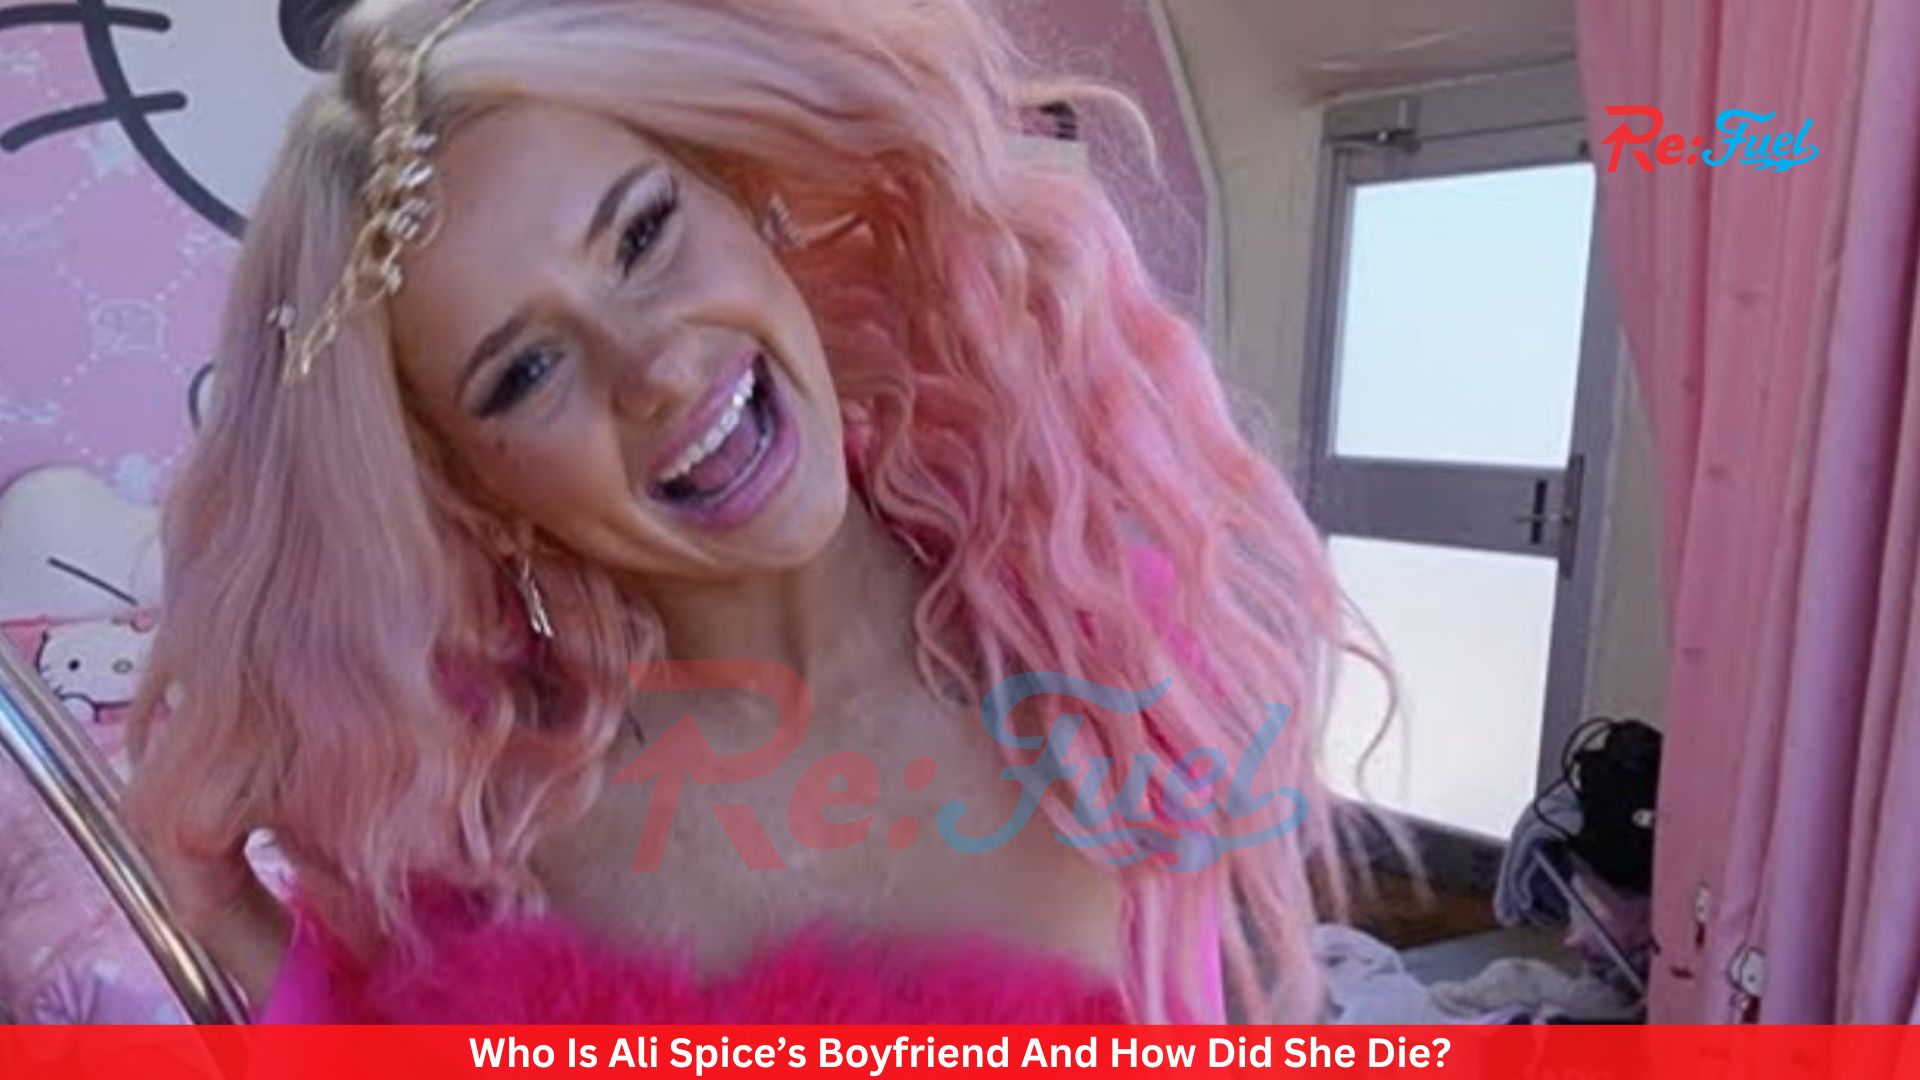 Who Is Ali Spice’s Boyfriend And How Did She Die?